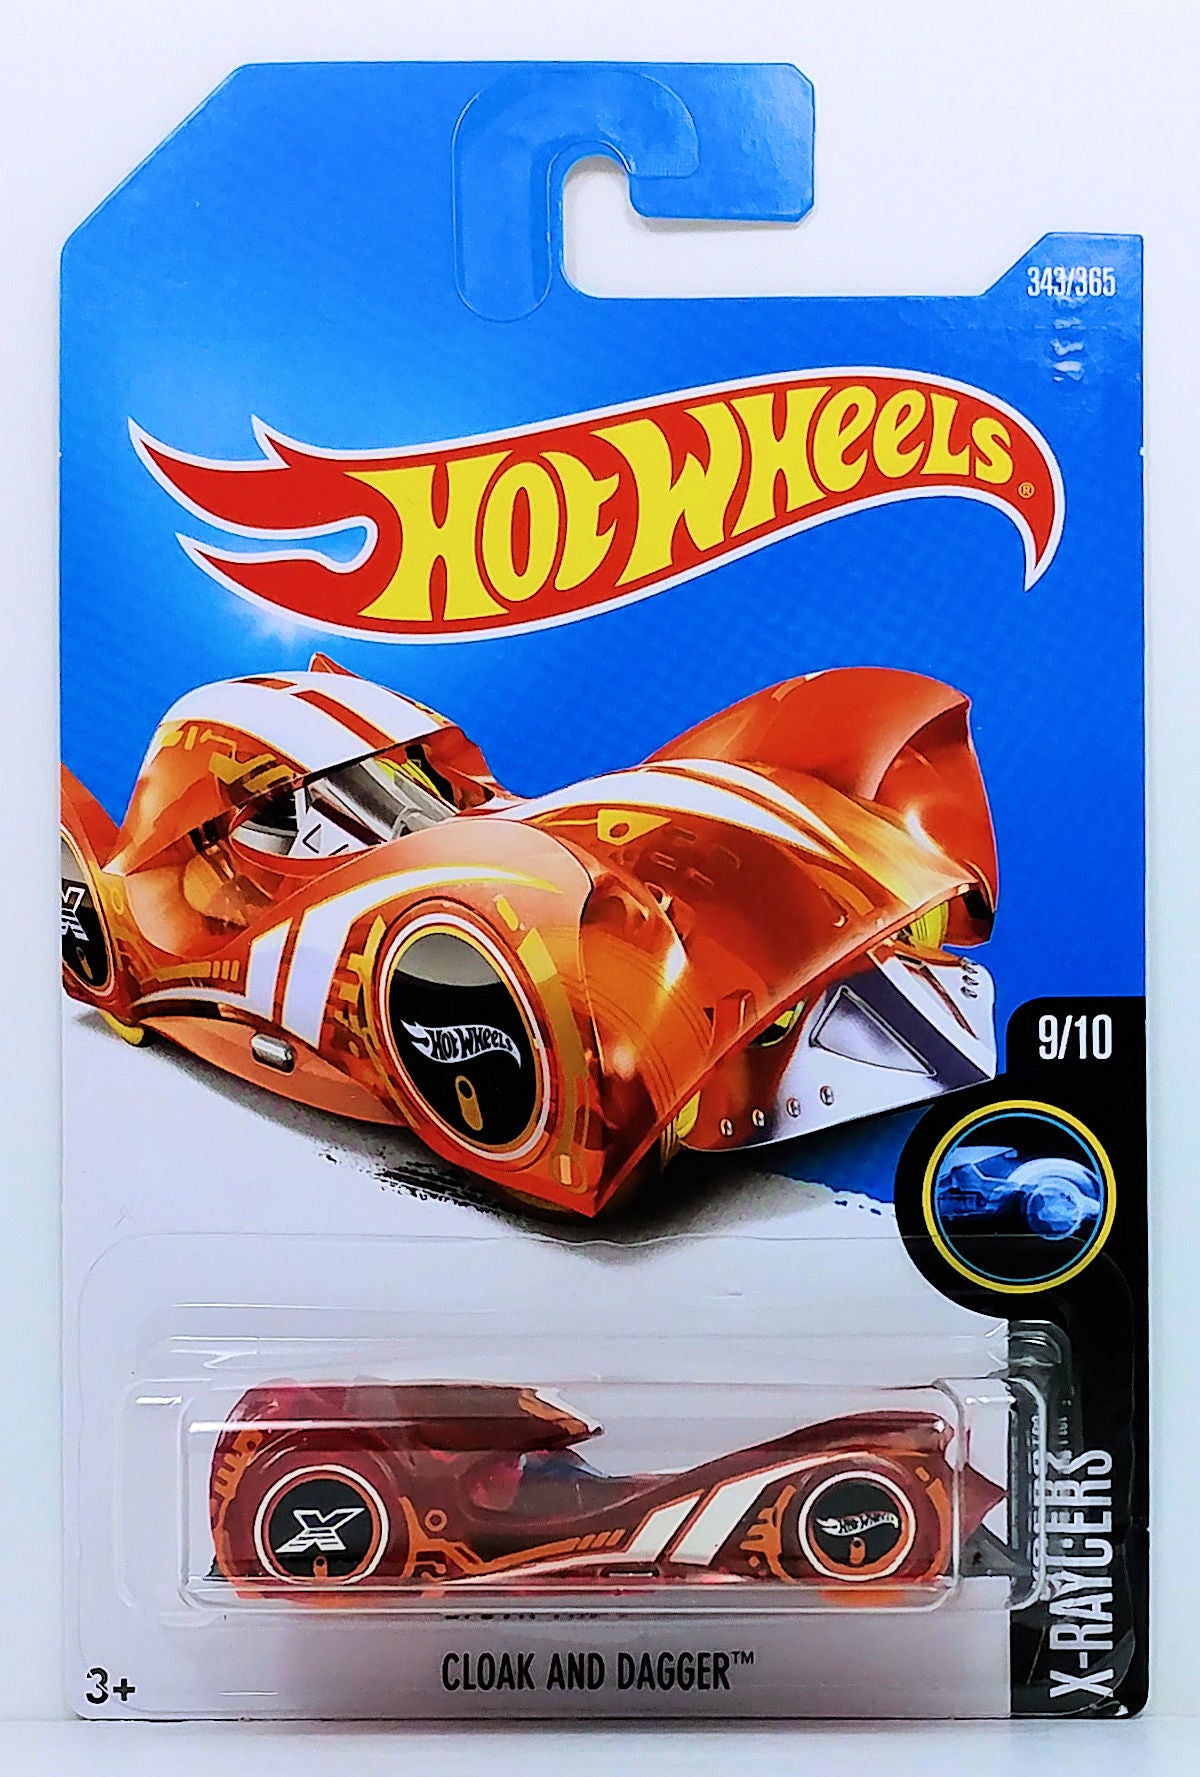 Hot Wheels 2017 - Collector # 343/365 - X-Raycers 9/10 - Cloak And Dagger - Transparent Red - IC